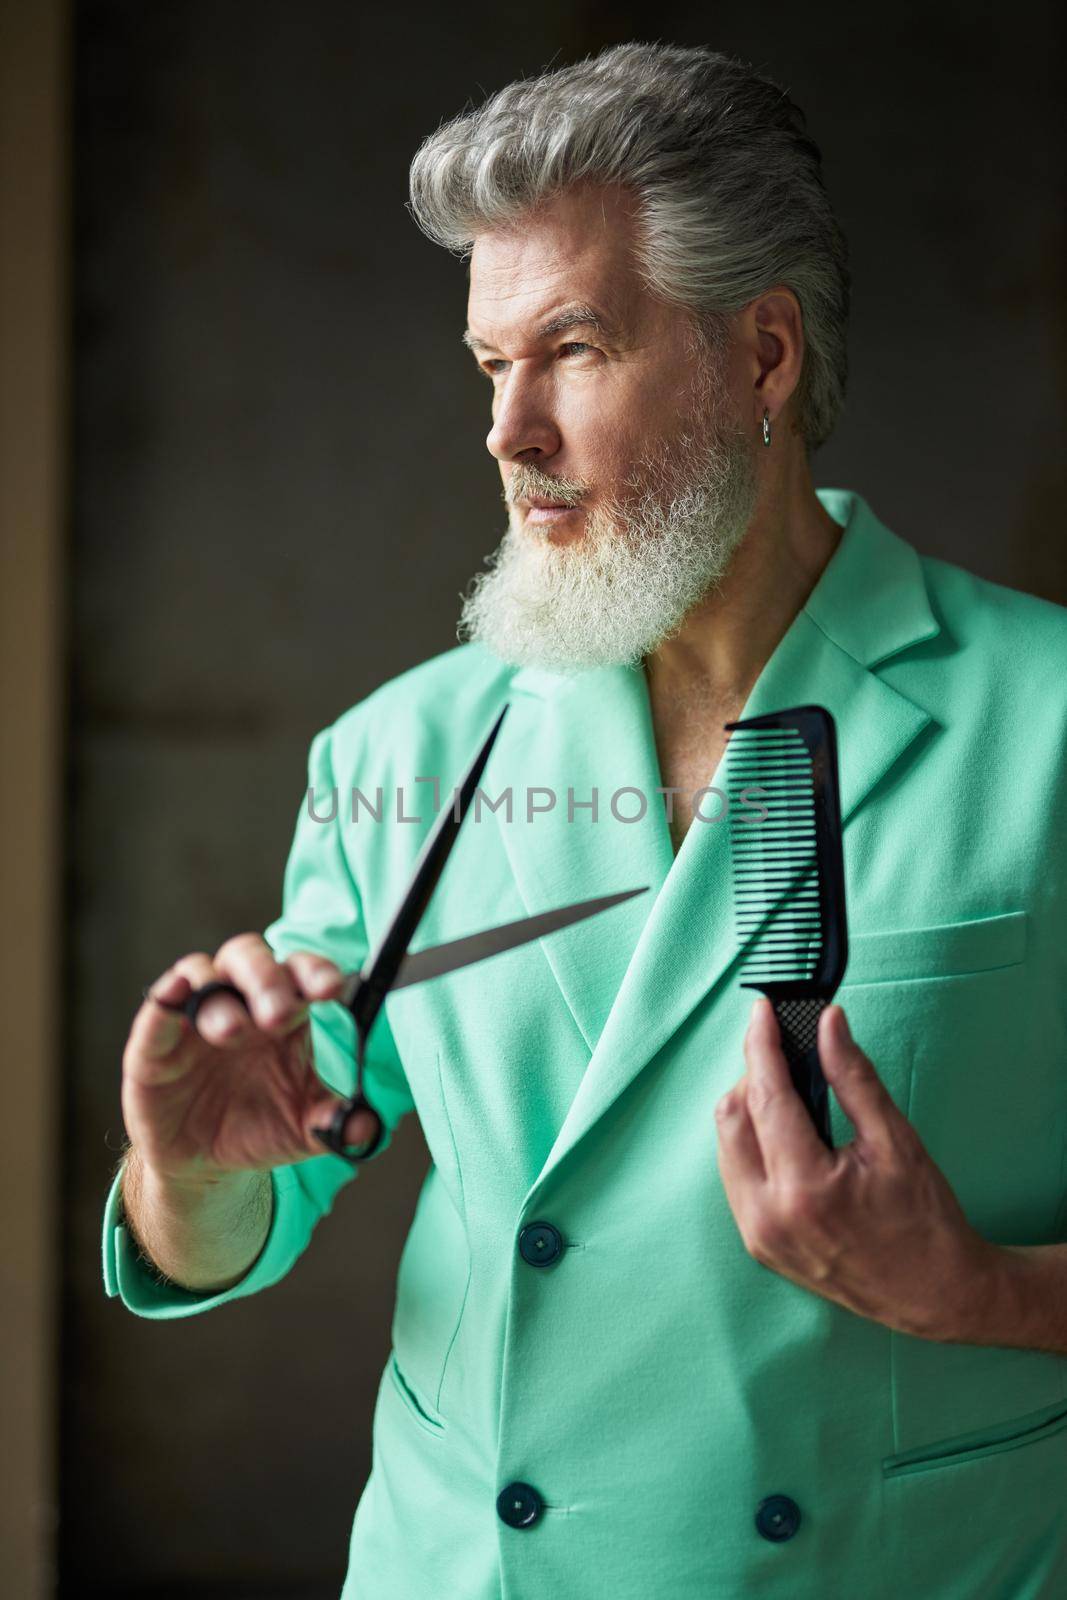 Portrait of classy gray haired mature man with beard wearing colorful outfit looking away, holding sharp barber scissors and hair comb, standing over dark background. Professional occupation concept